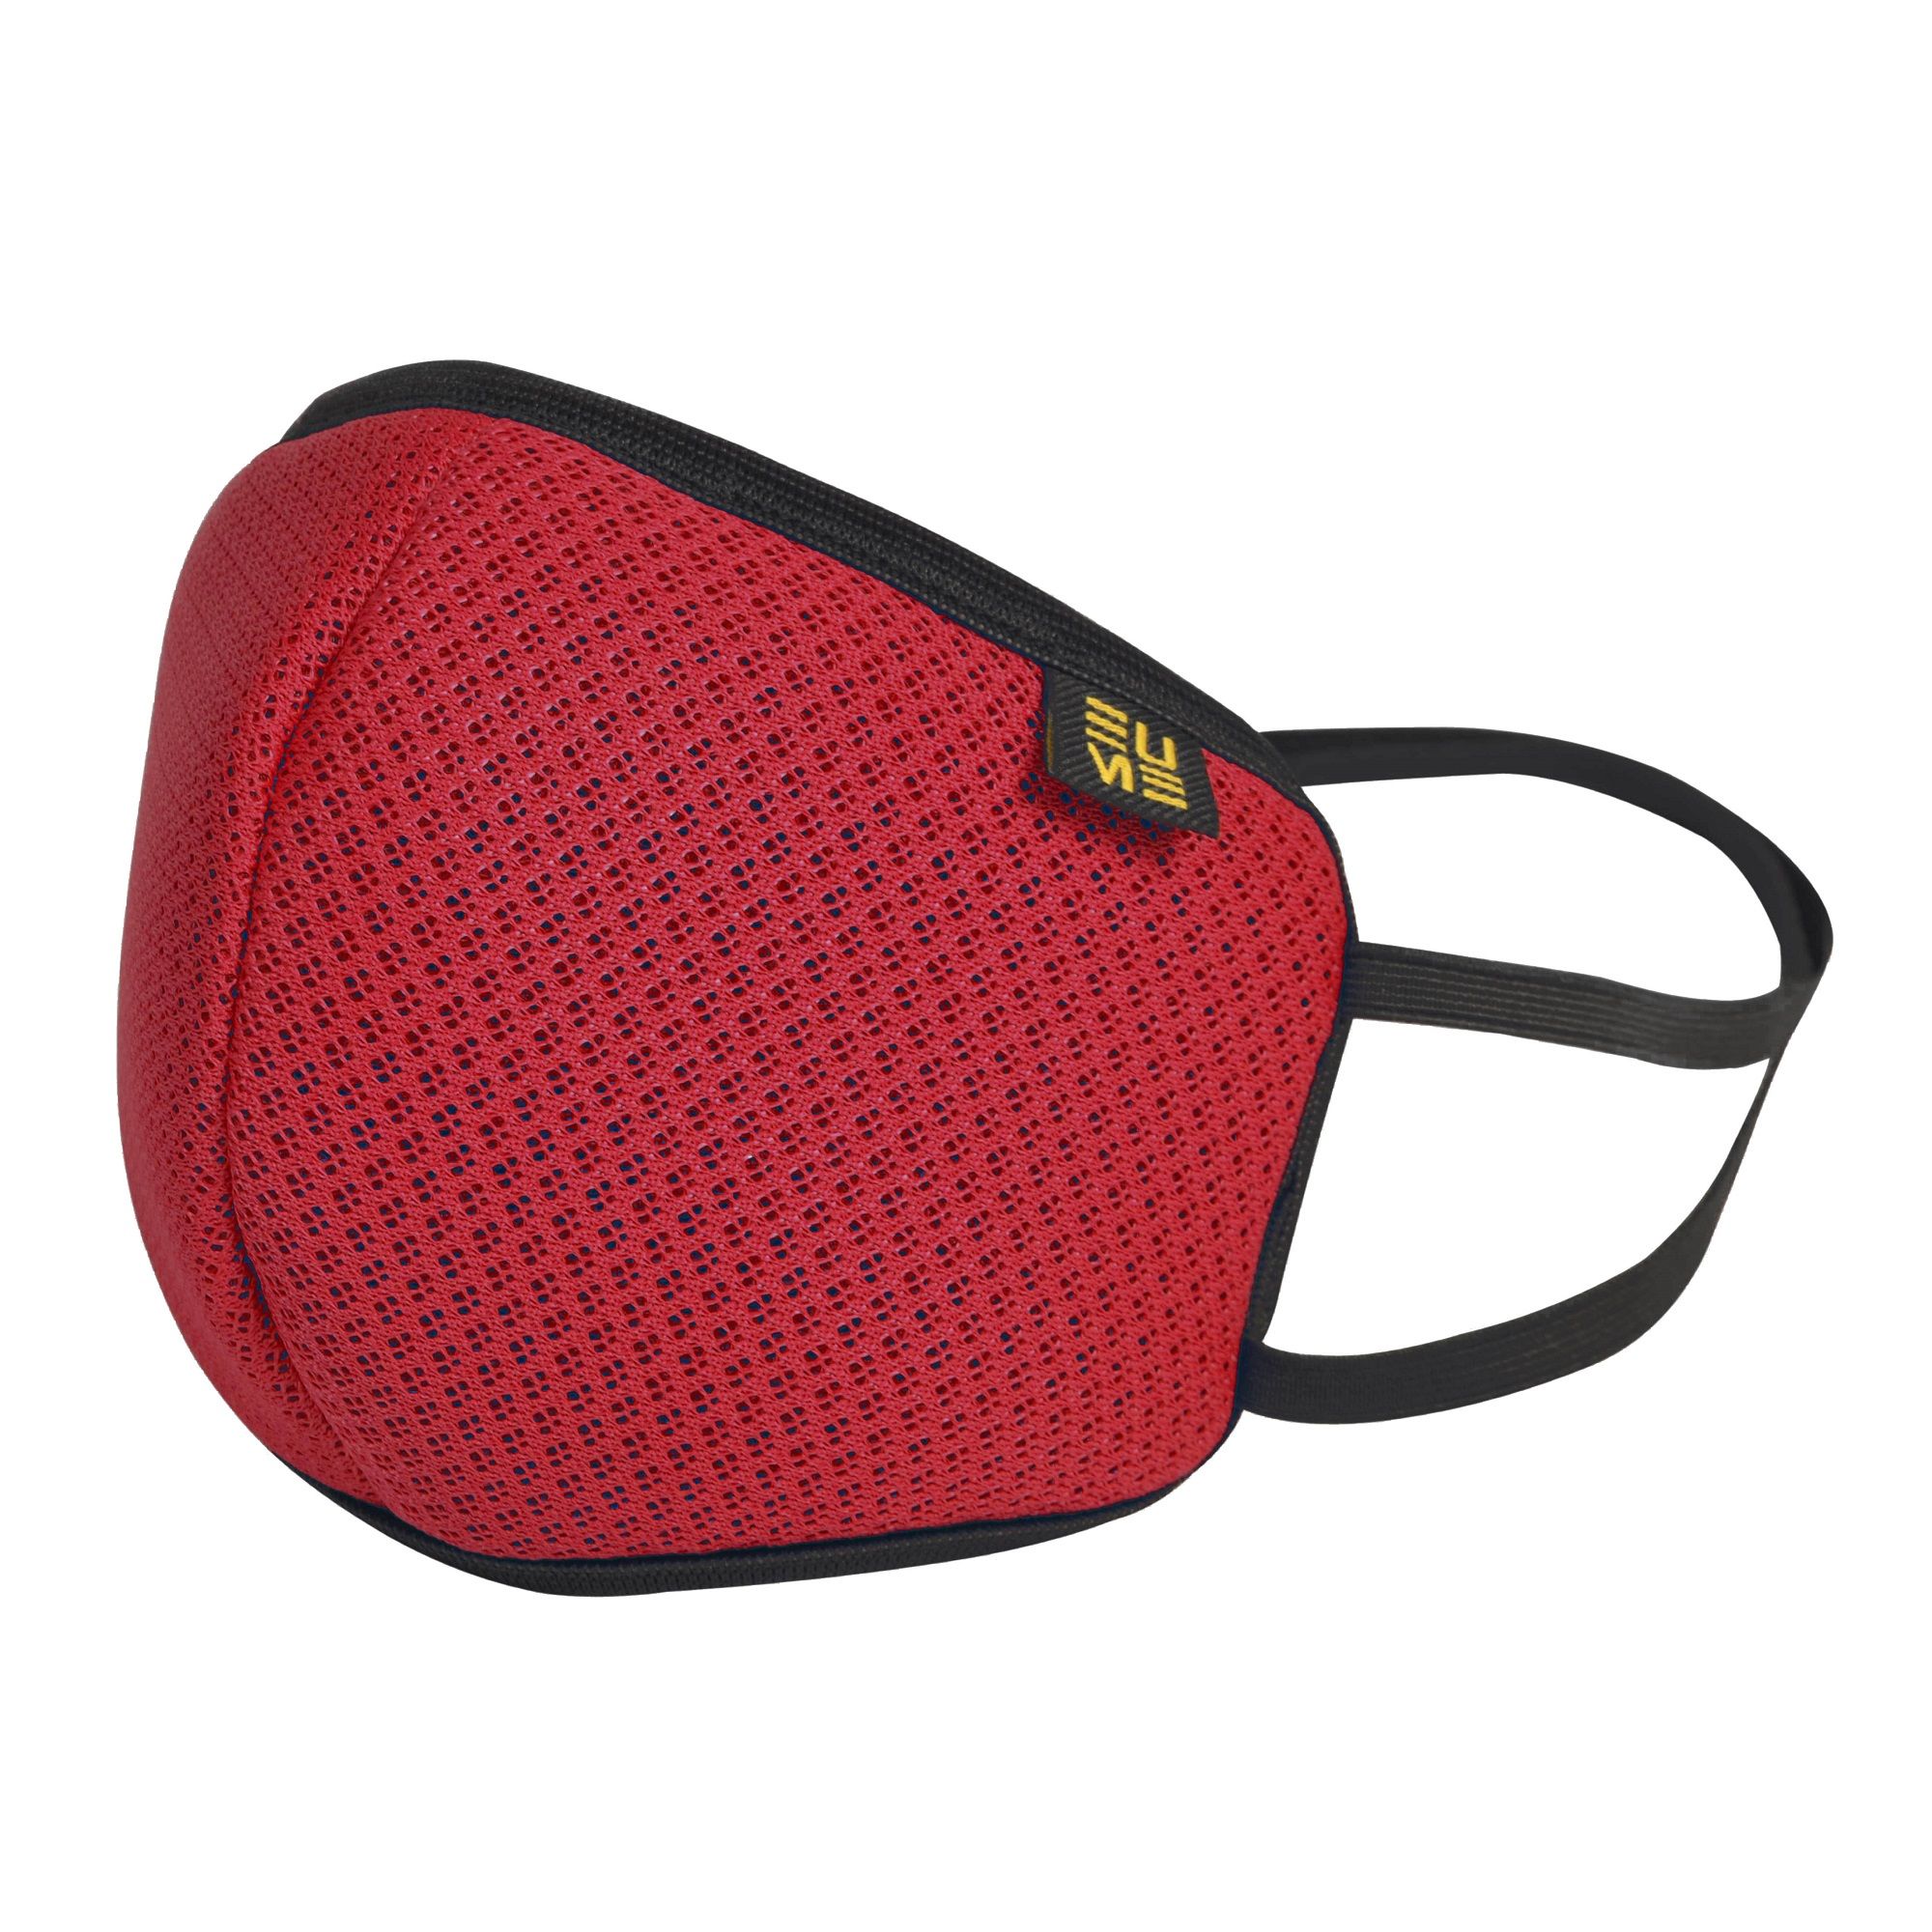 EUME Protect+ 95 Reusable Face Mask For Men And Women In Red